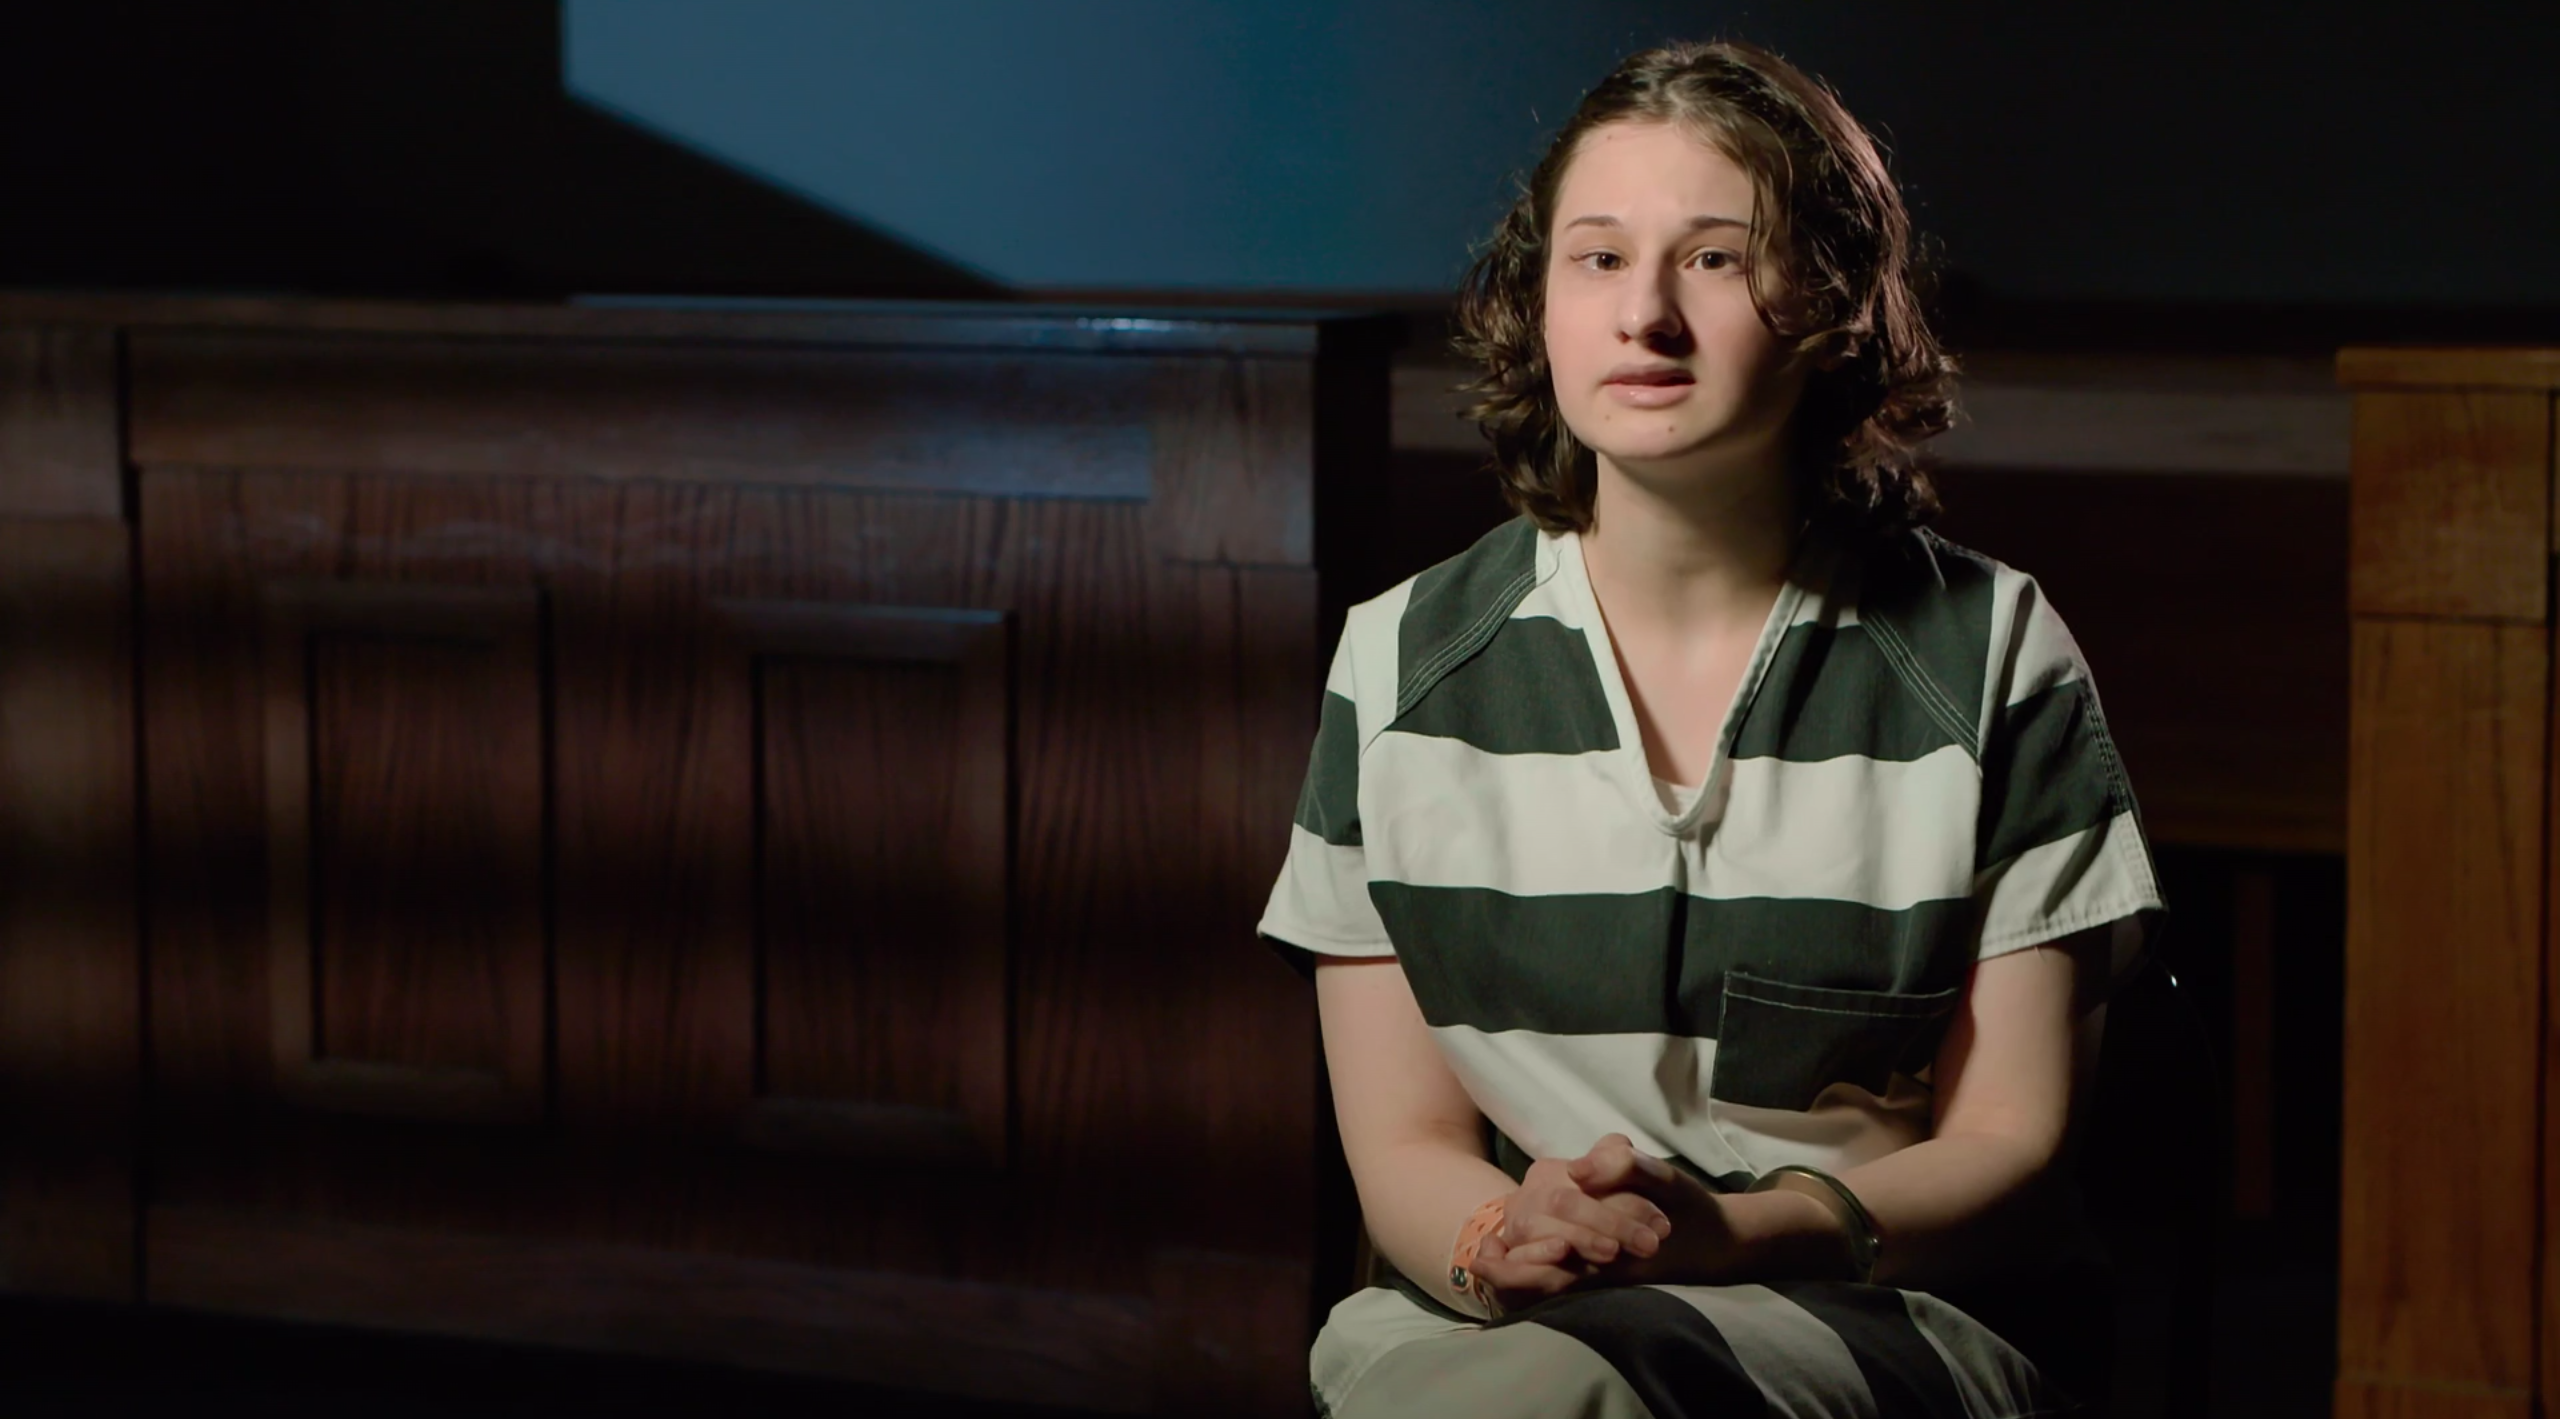 Gypsy Rose Blanchard Now: See Photos of Her Today